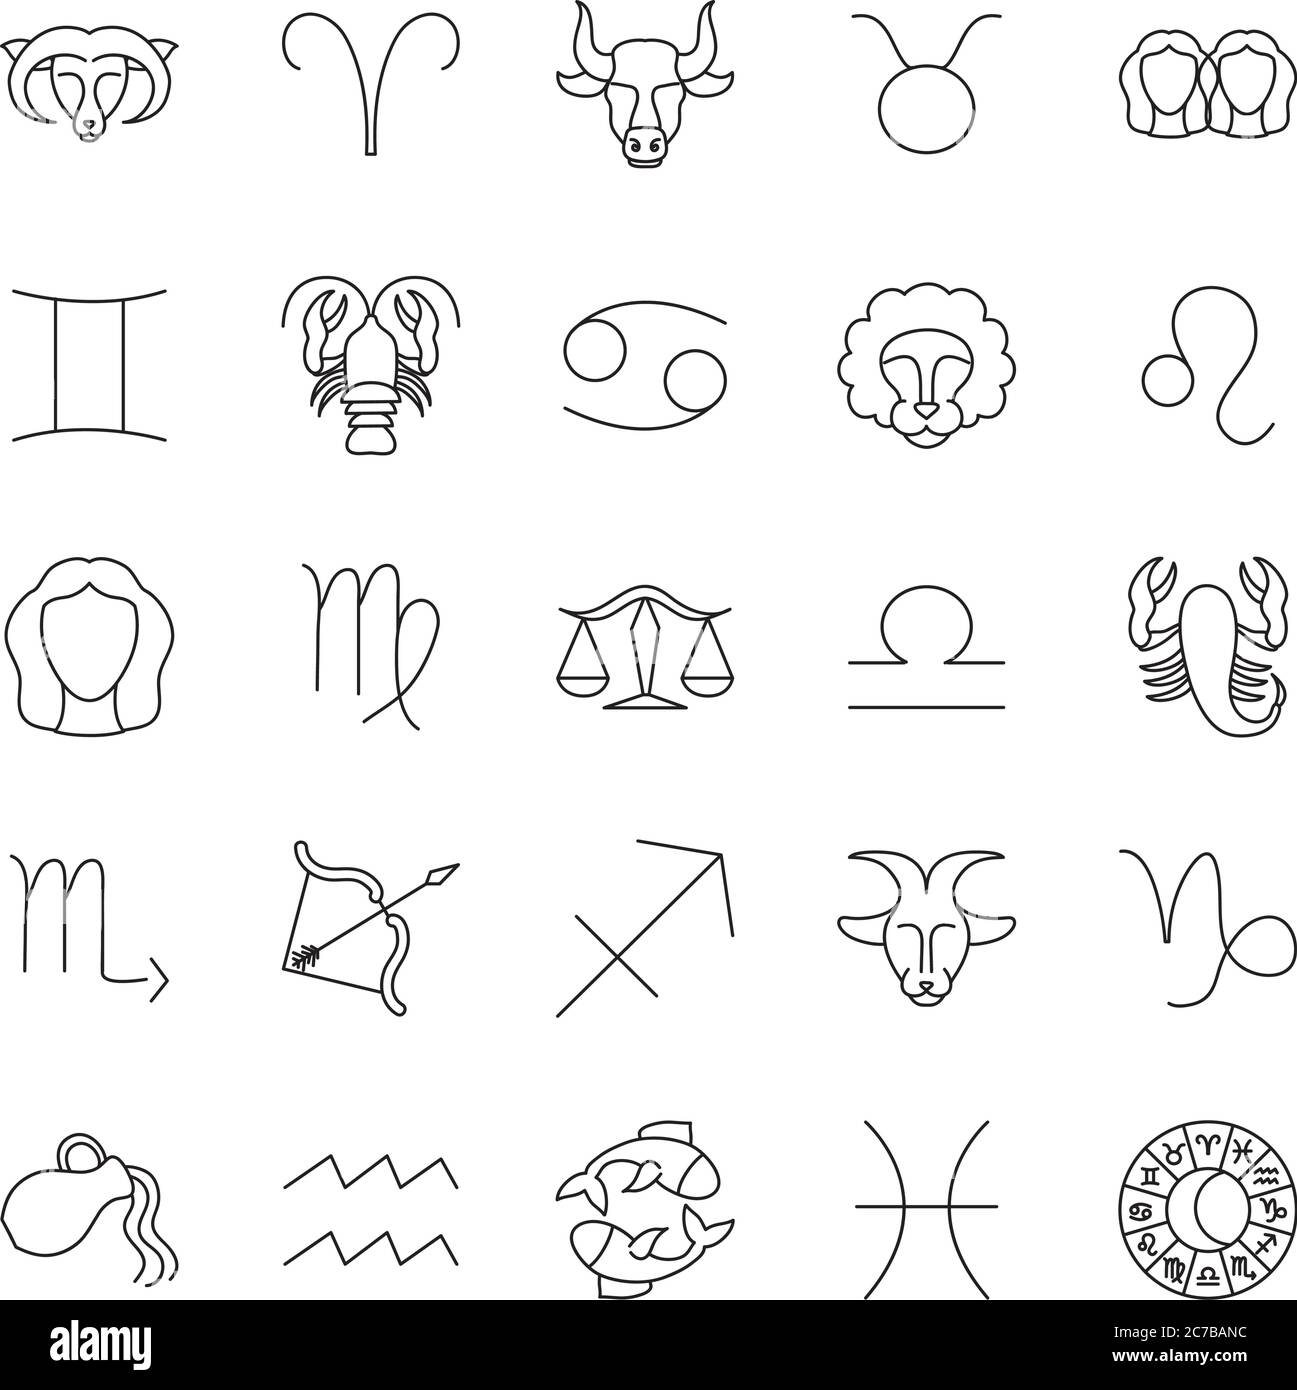 astrology symbols icon set over white background, line style, vector illustration Stock Vector